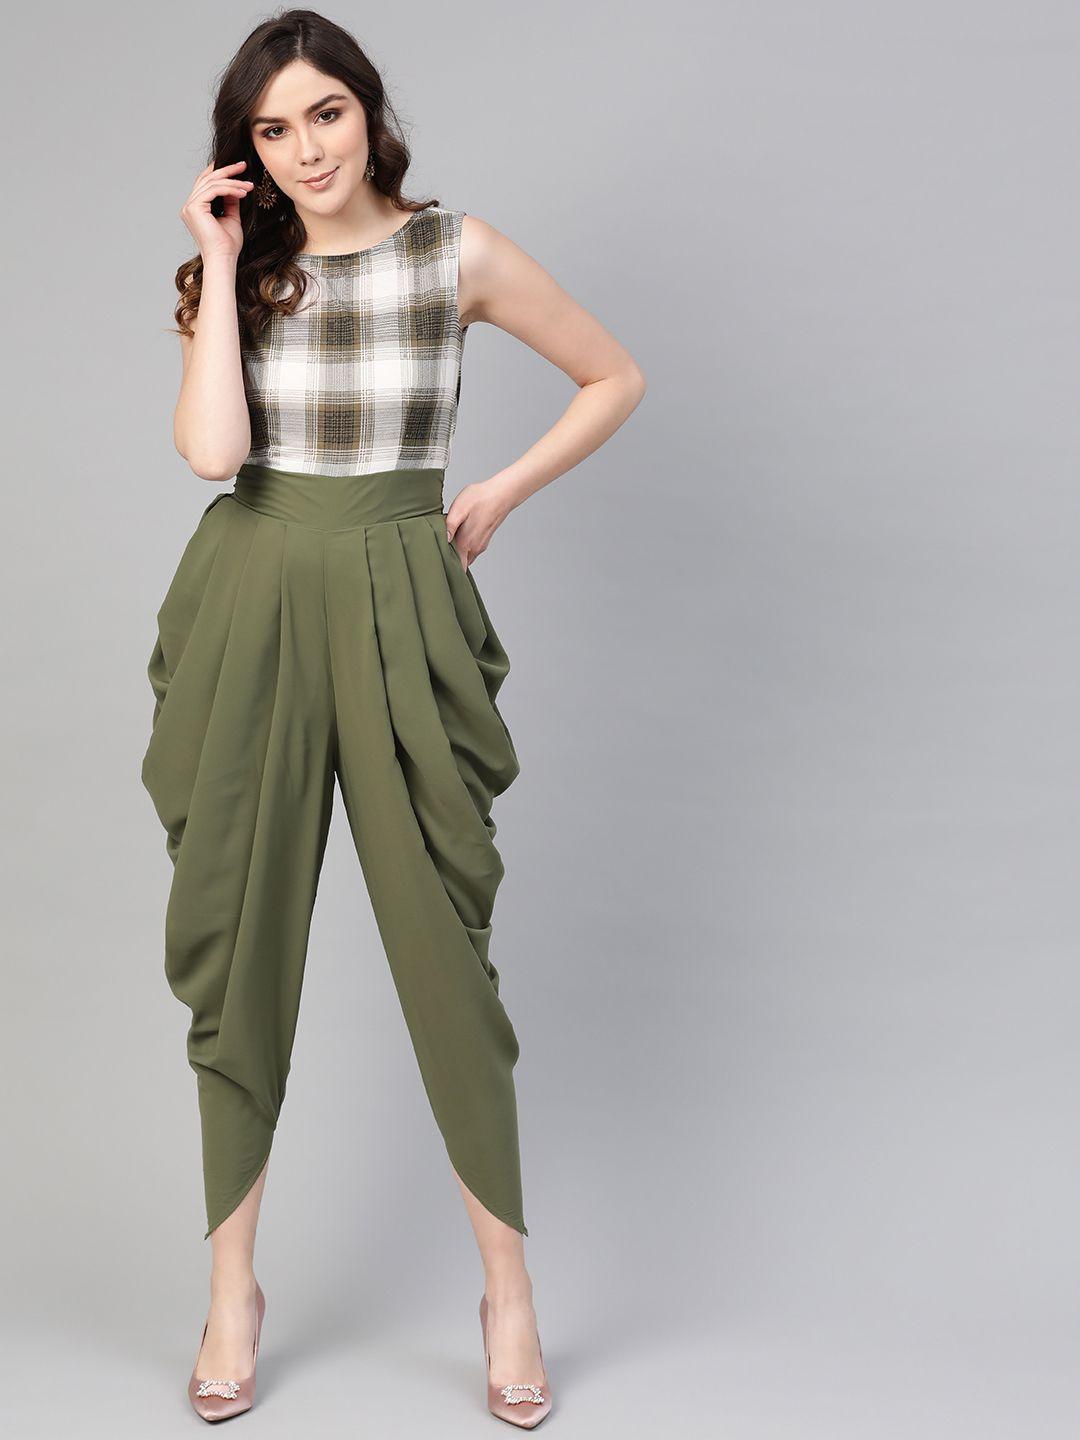 zima leto women olive green & off-white checked culotte jumpsuit